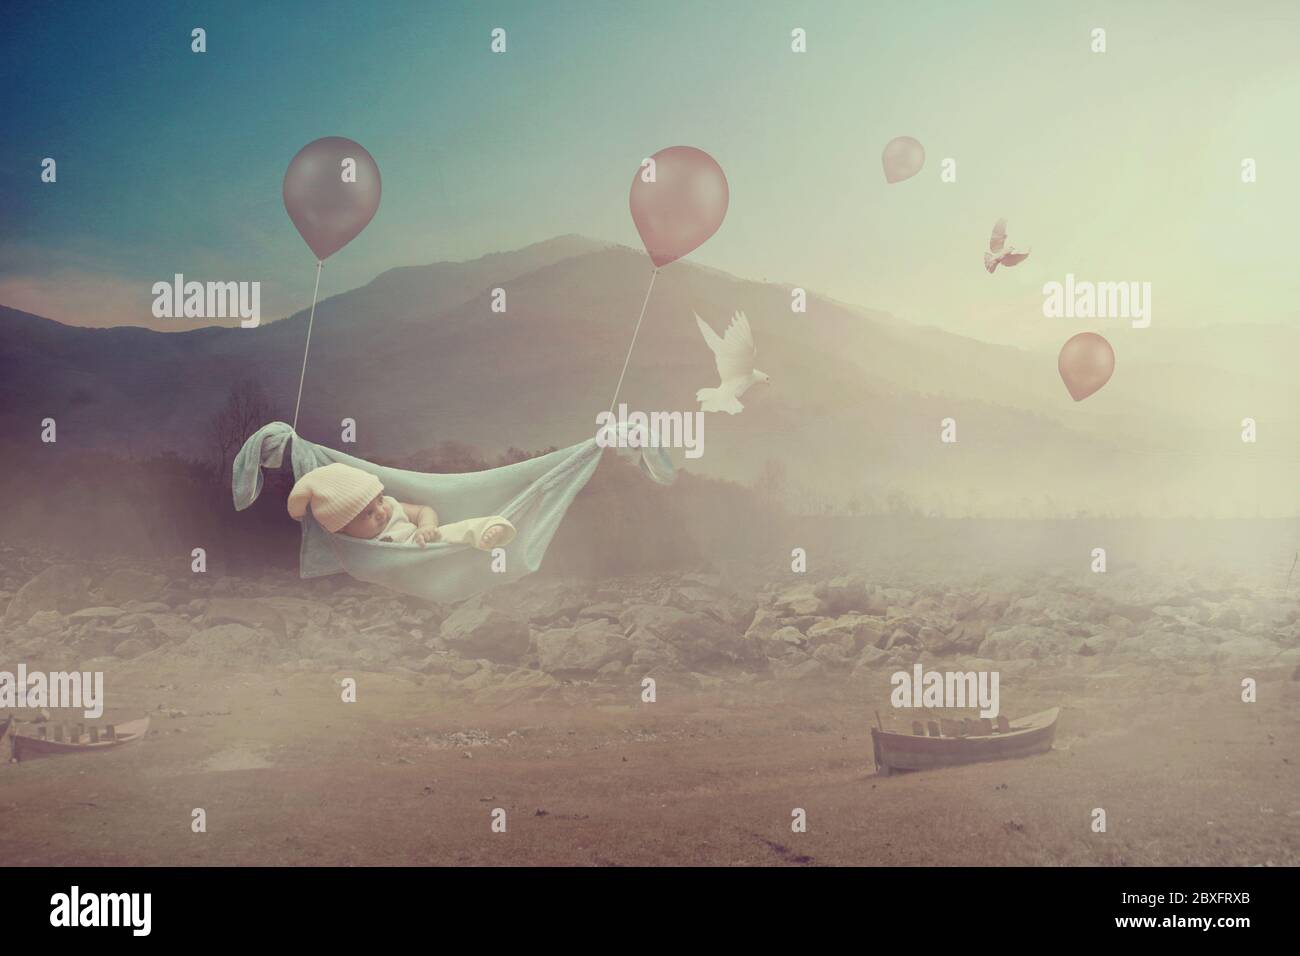 Adorable baby flying with balloons in a valley  - Dreaming Stock Photo